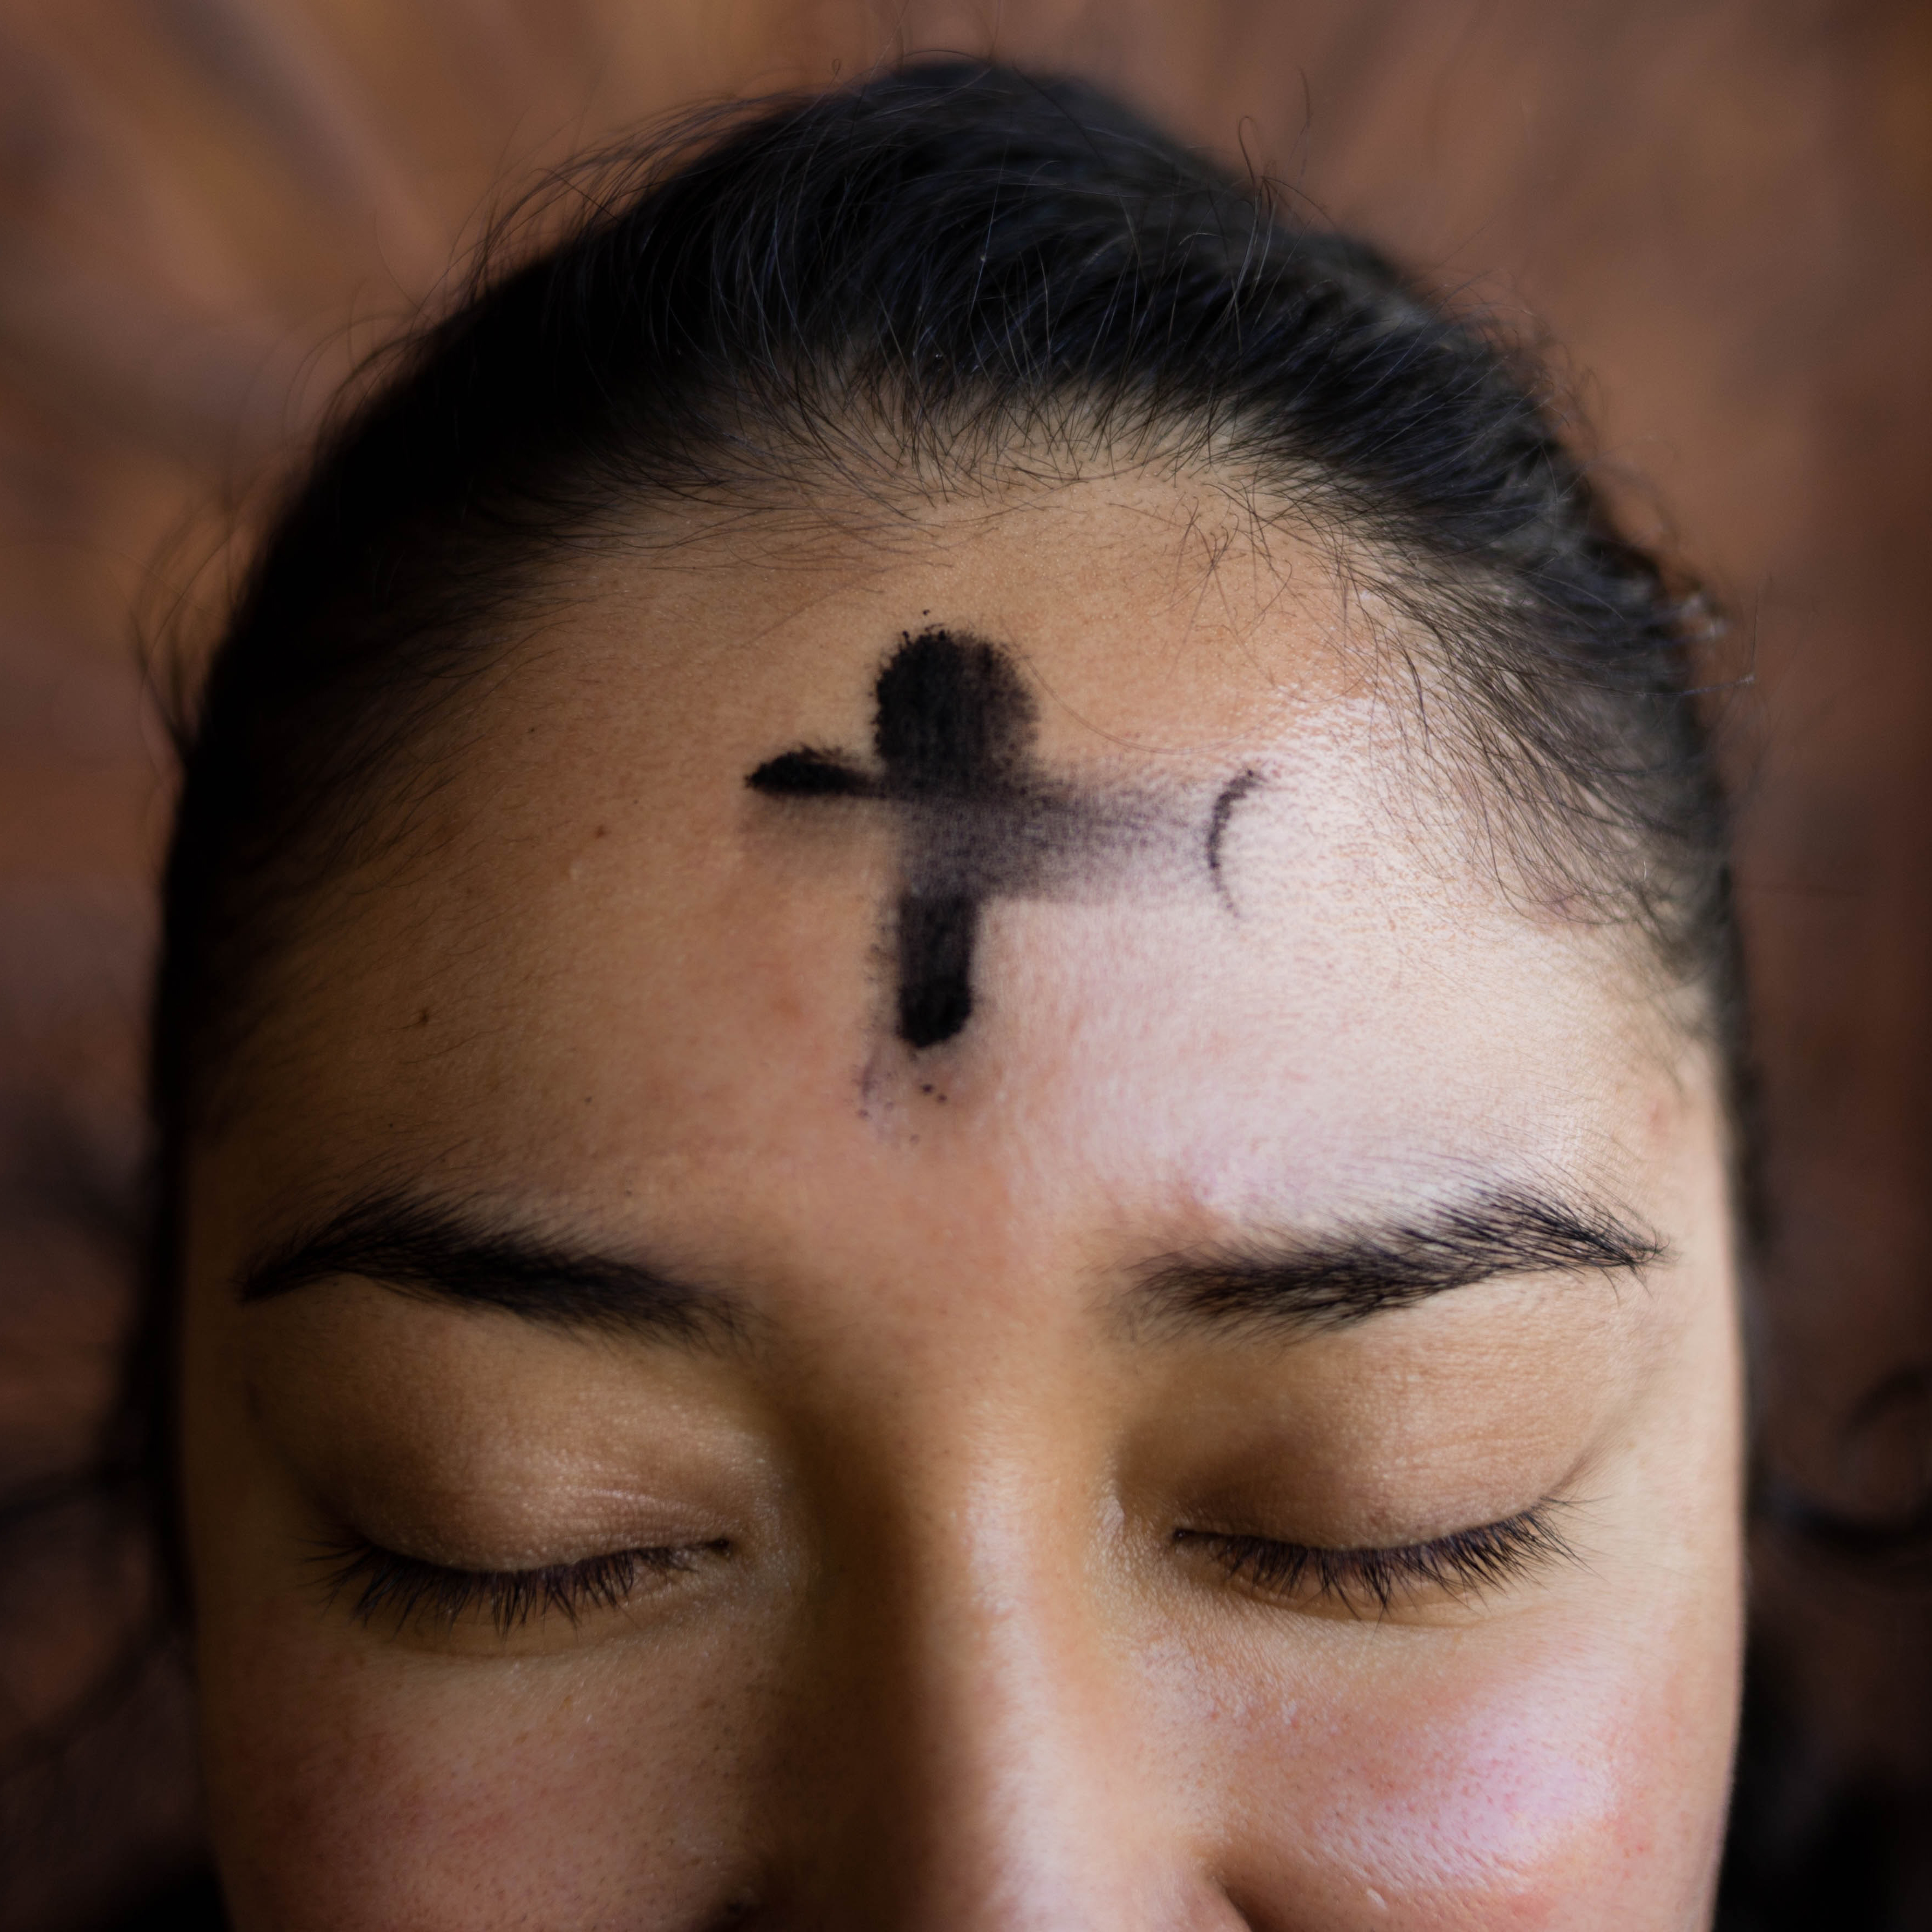 Photo of a lady with ashes on her forehead